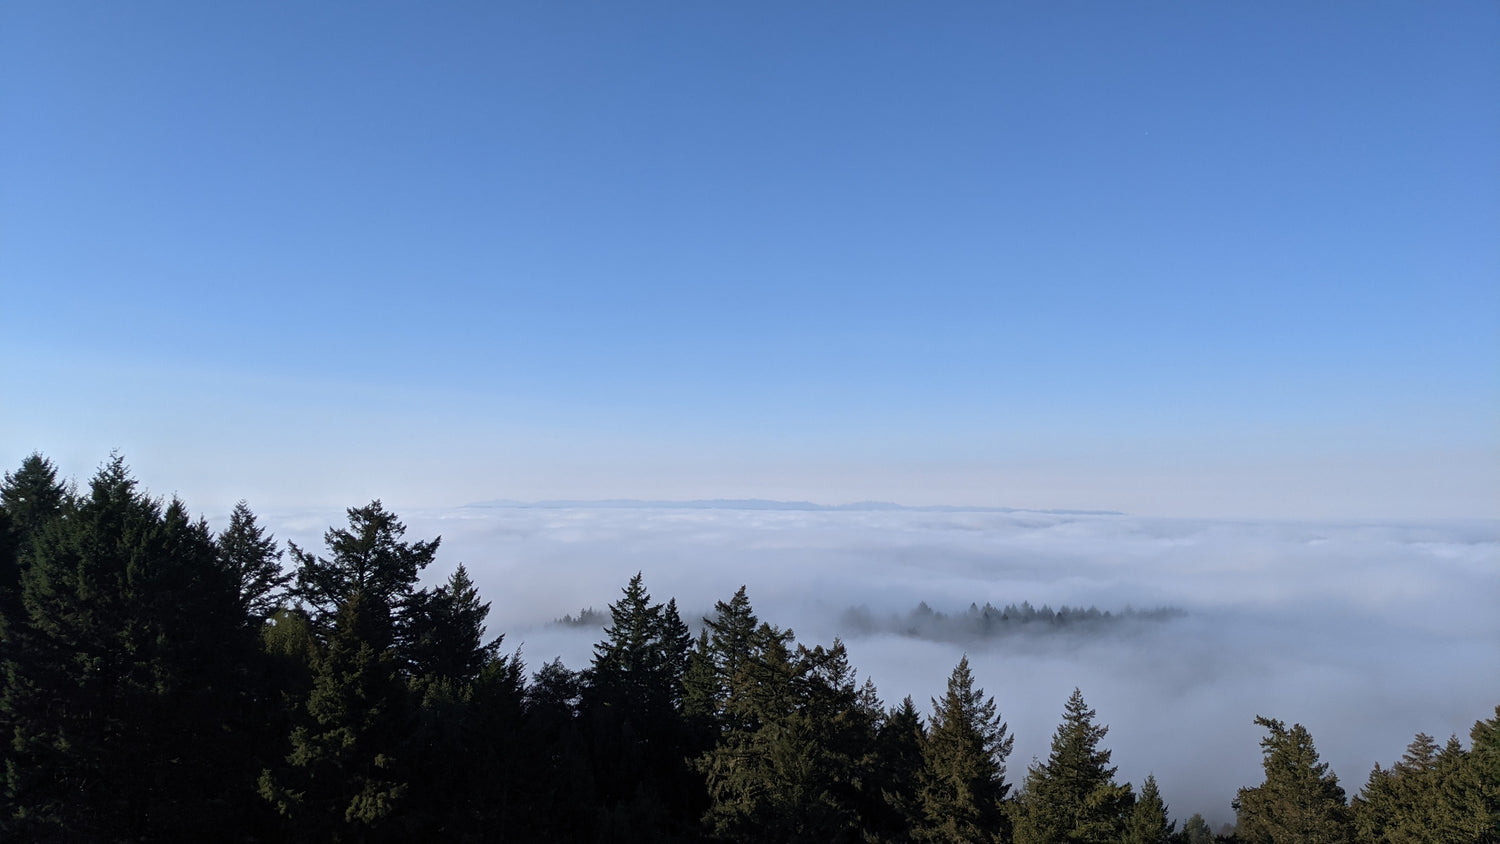 Foggy Mountain scene with blue skies